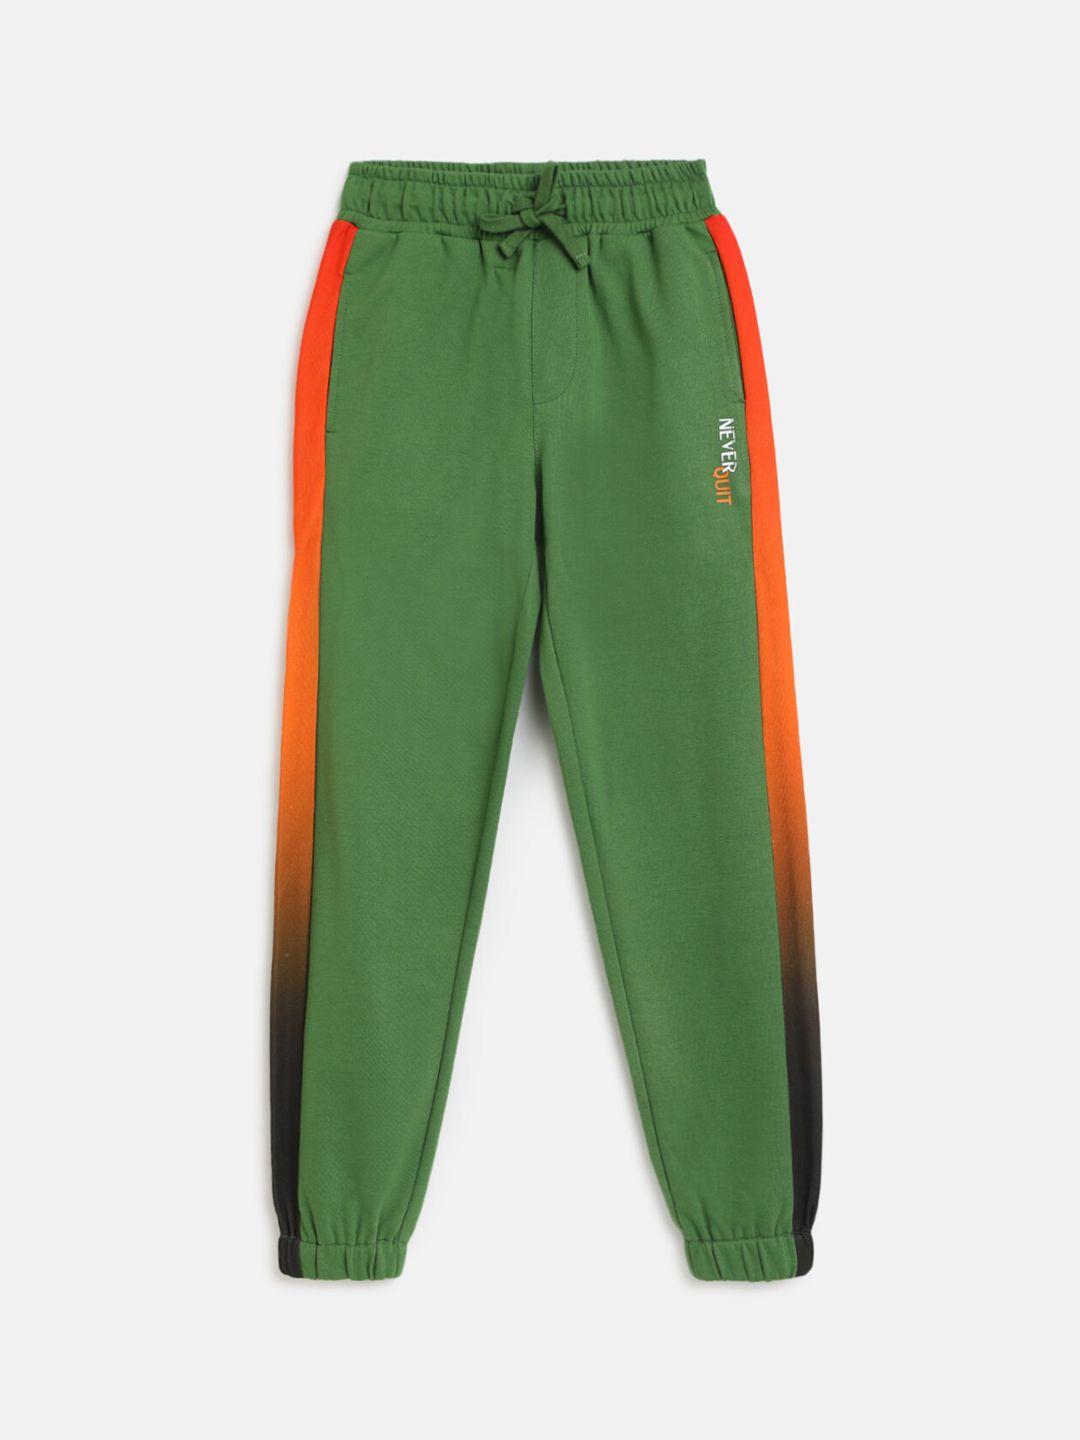 Lil Tomatoes Boys Green & Orange Solid Pure Cotton Joggers